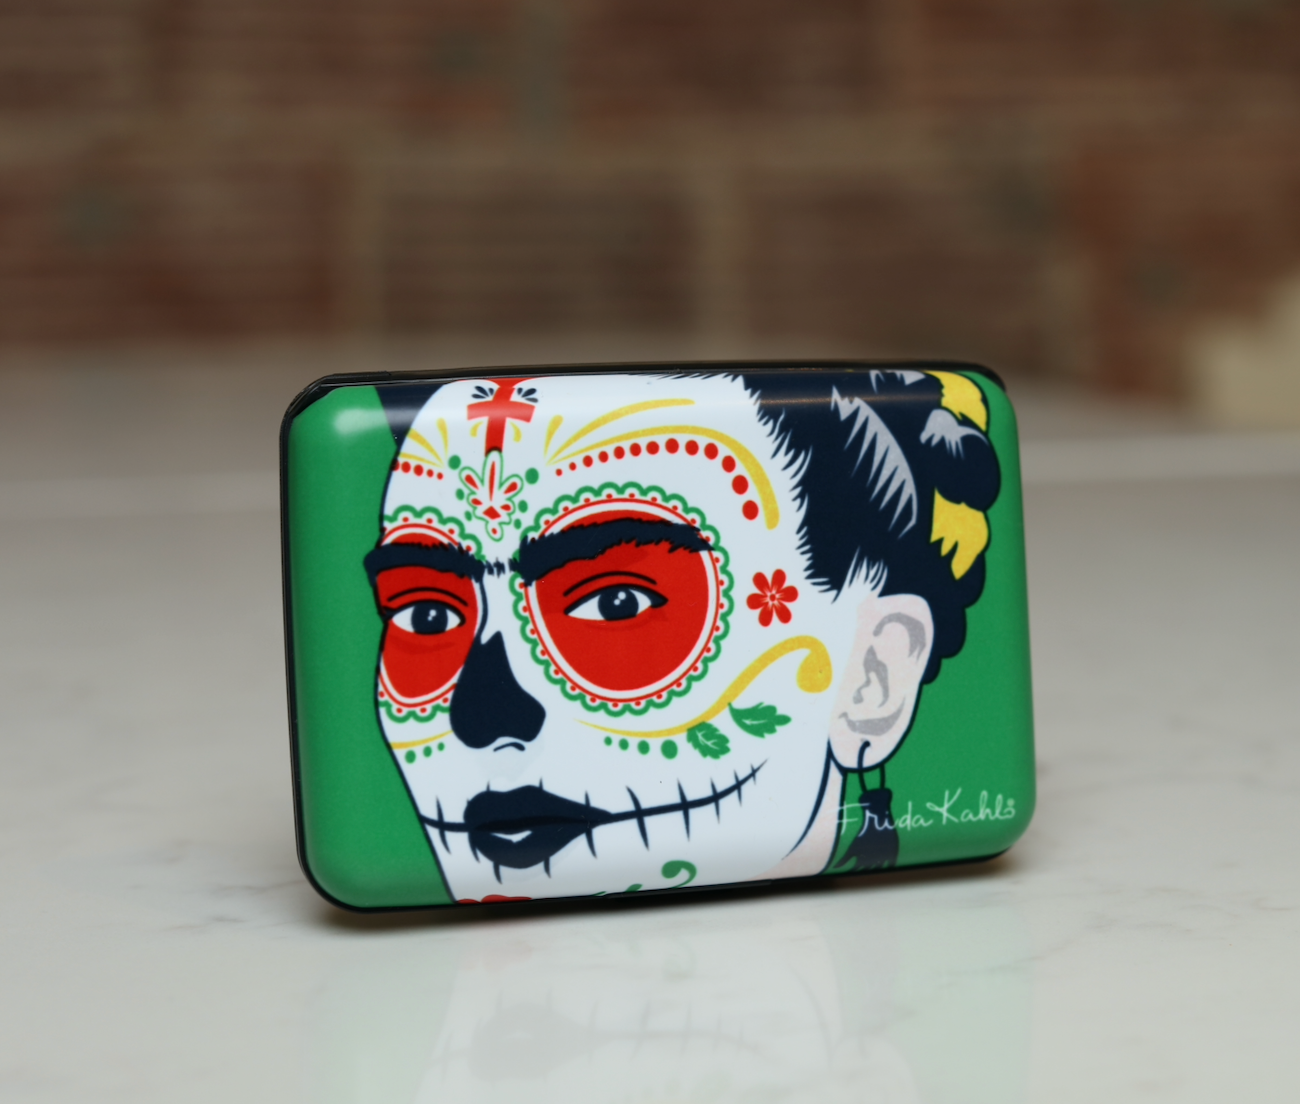 Multicultural green secure armored wallet.